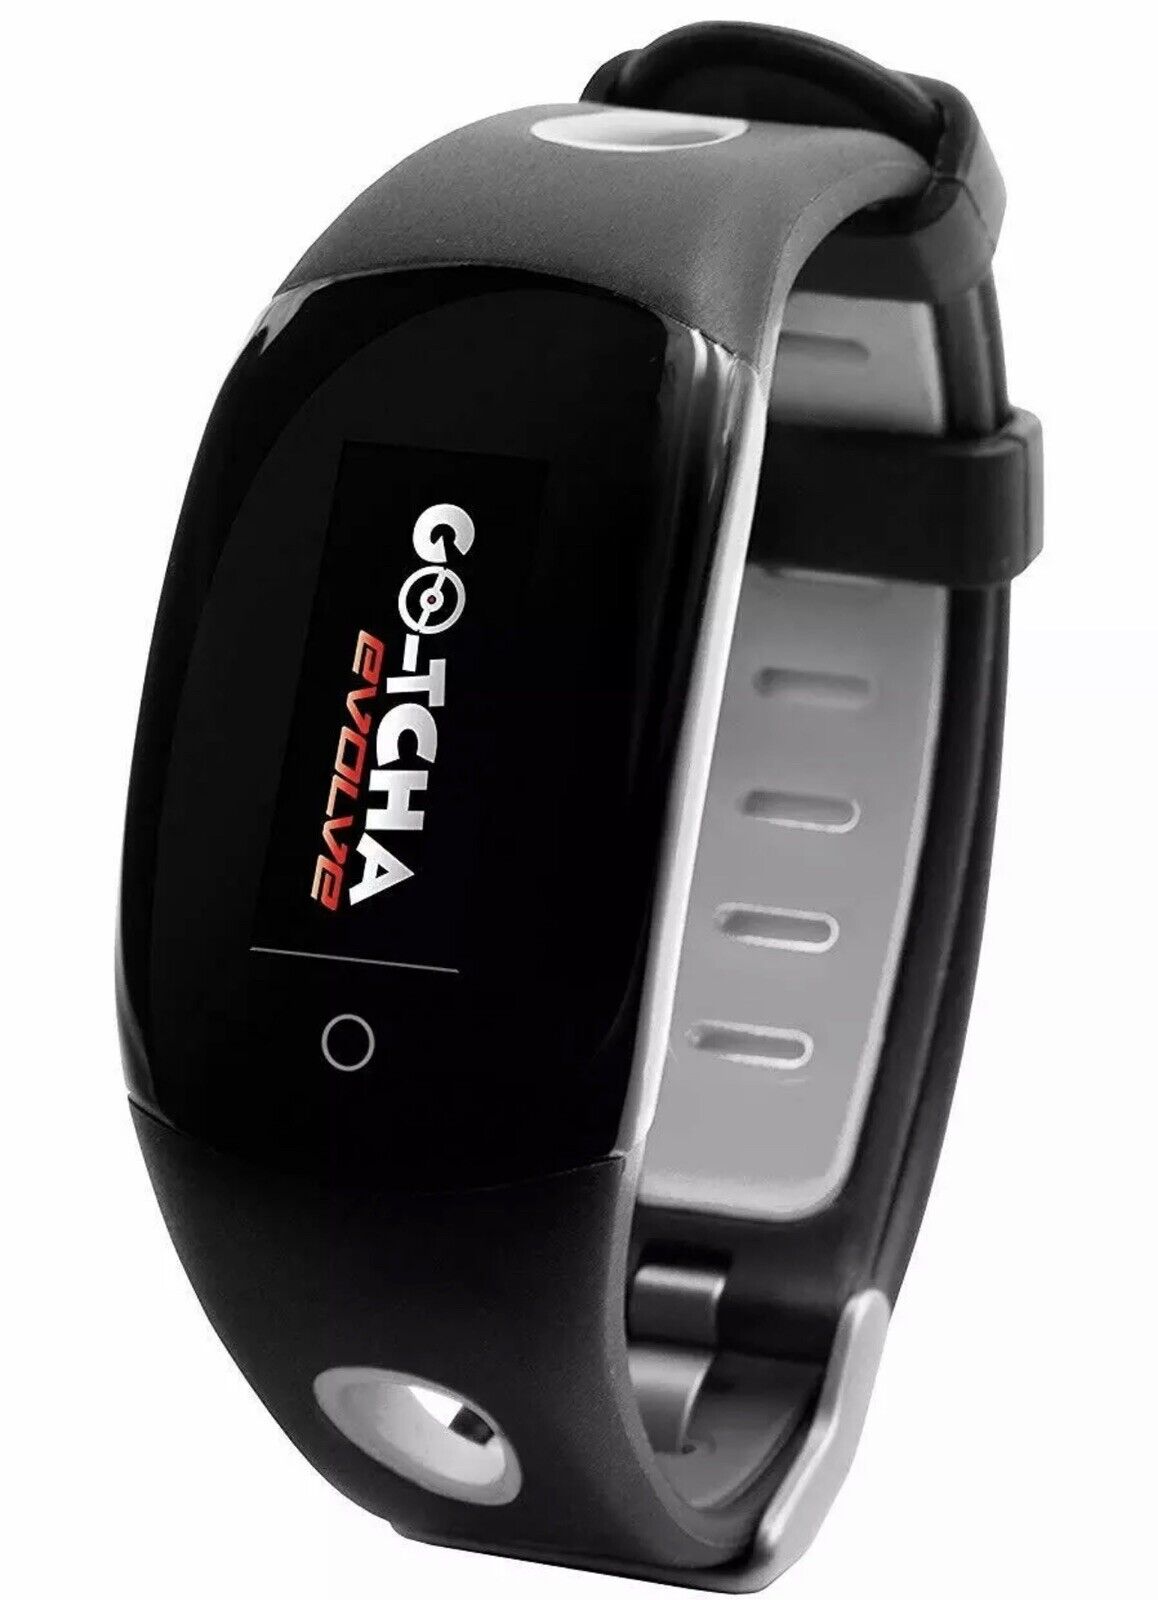 Pokemon Go-Tcha Evolve Automatic Catch Collection Item Led Touch Smart Watch